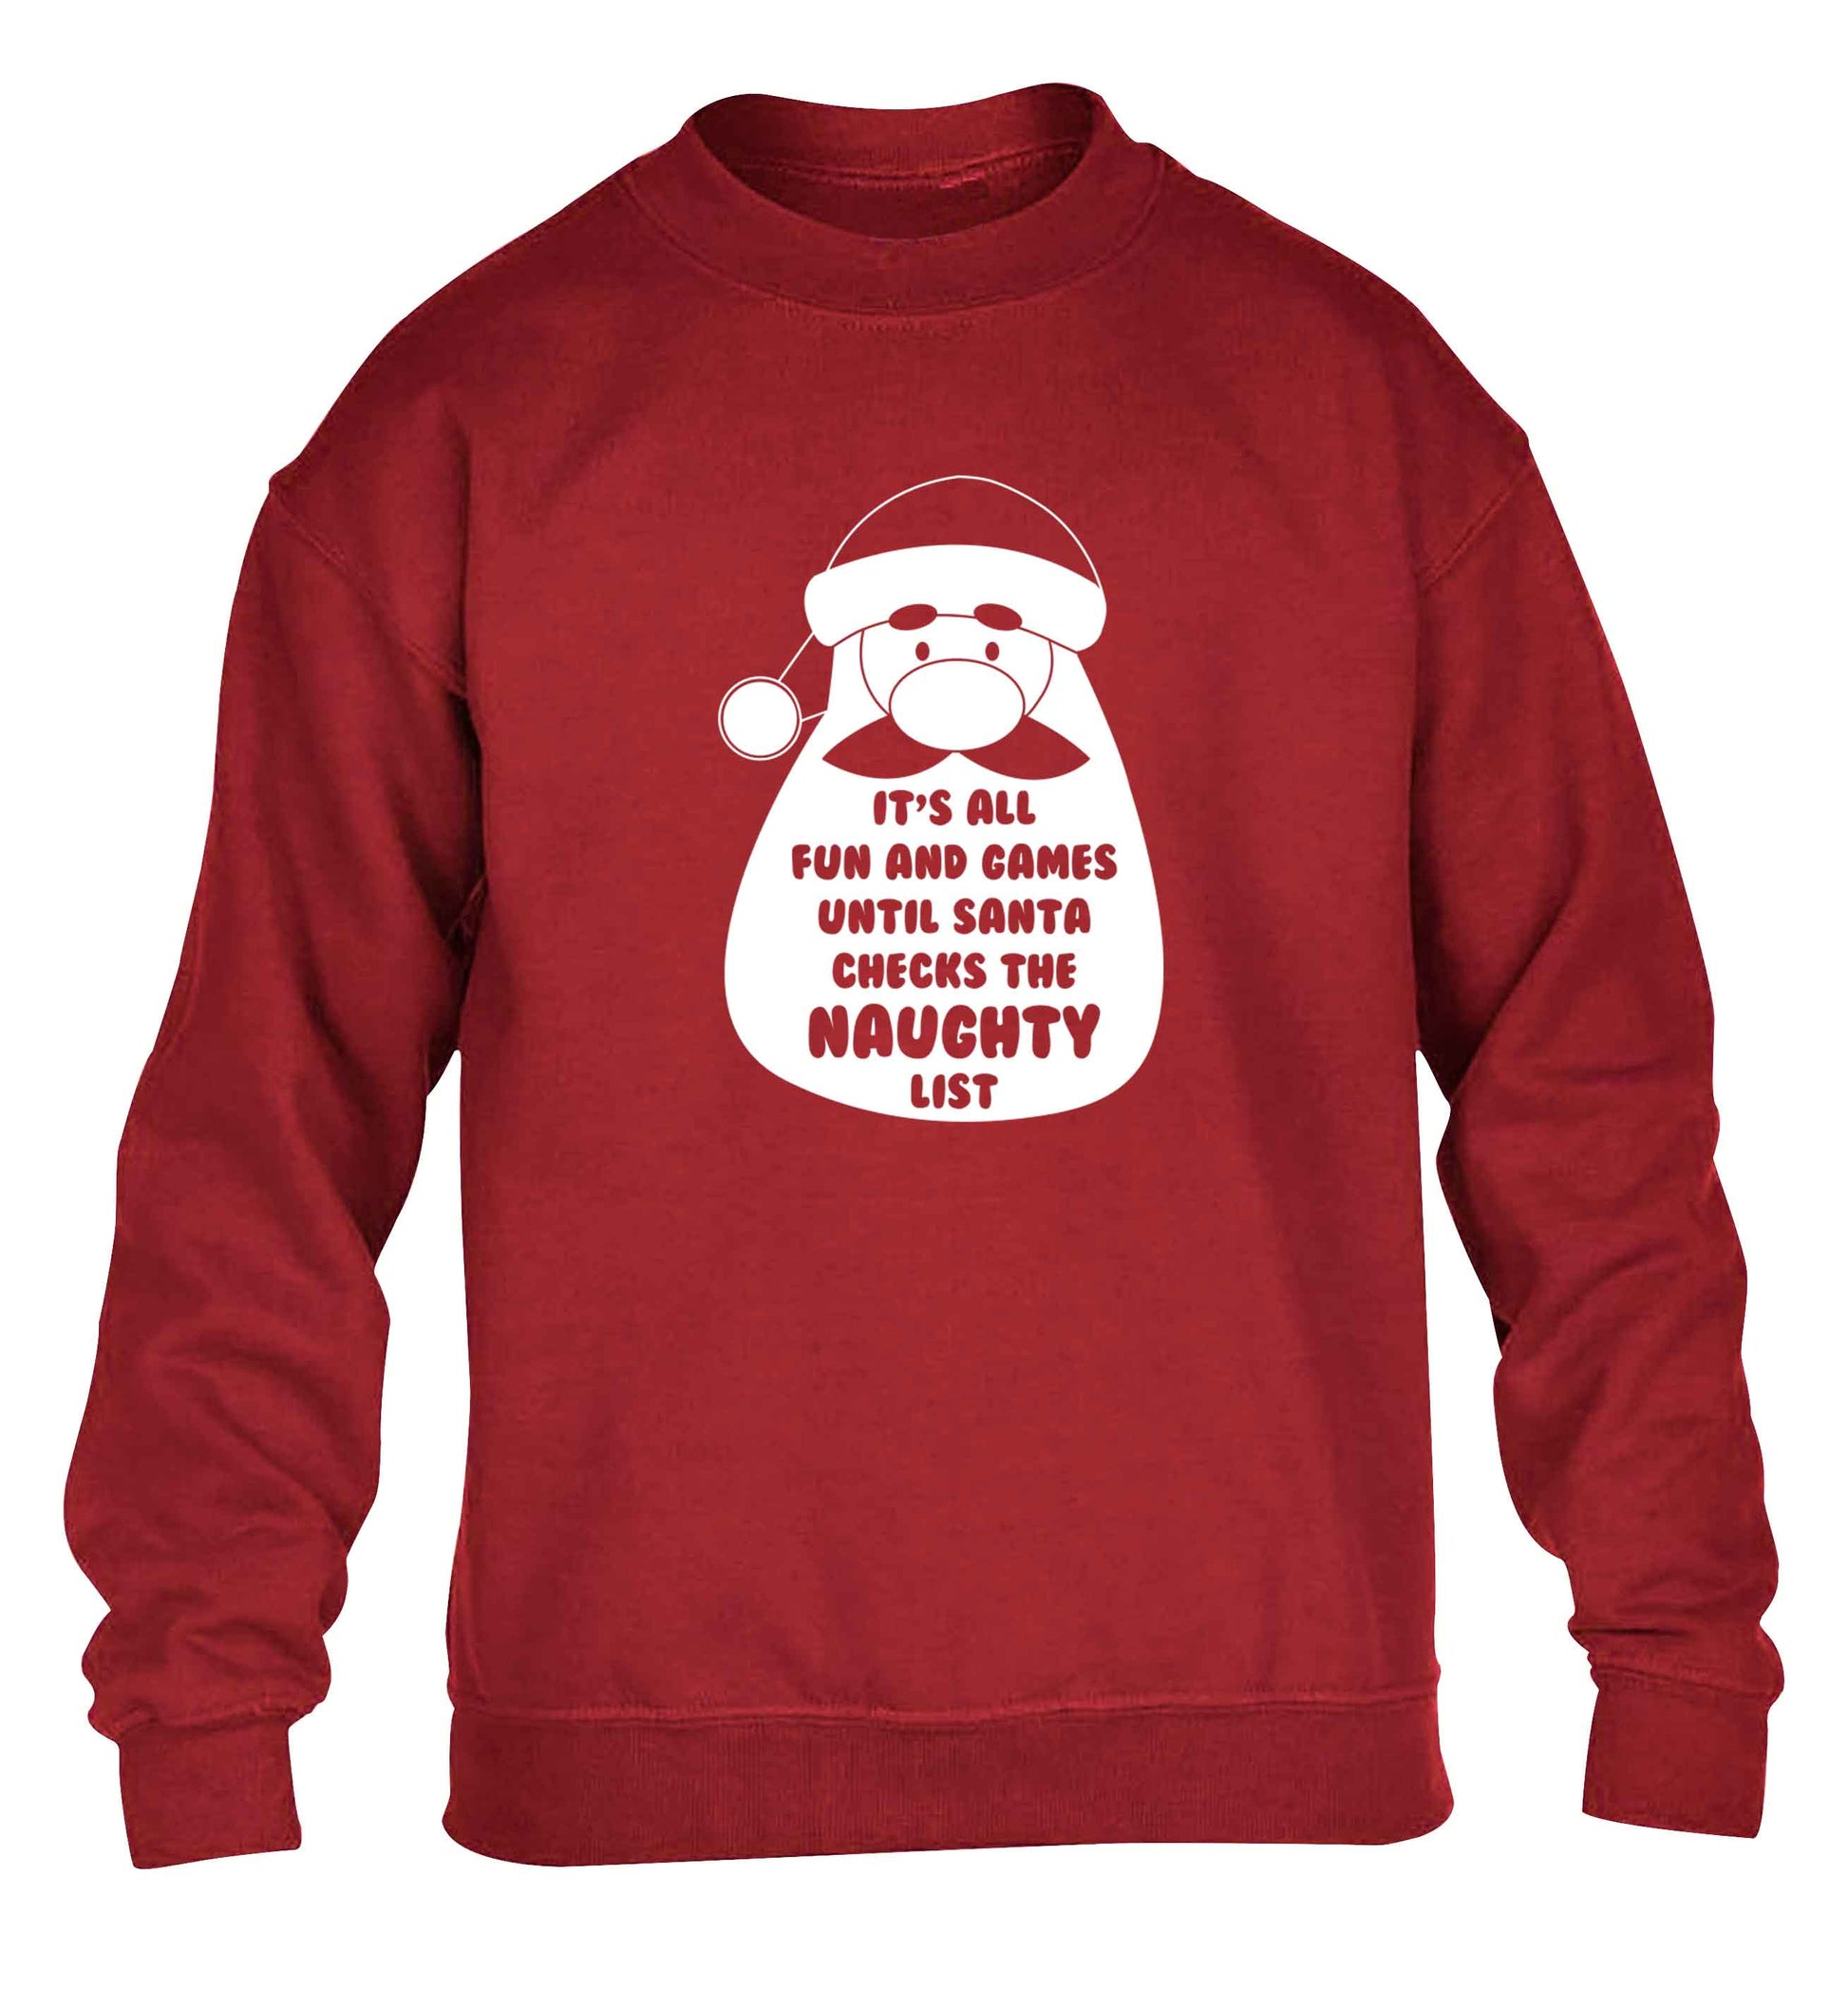 It's all fun and games until Santa checks the naughty list children's grey sweater 12-13 Years